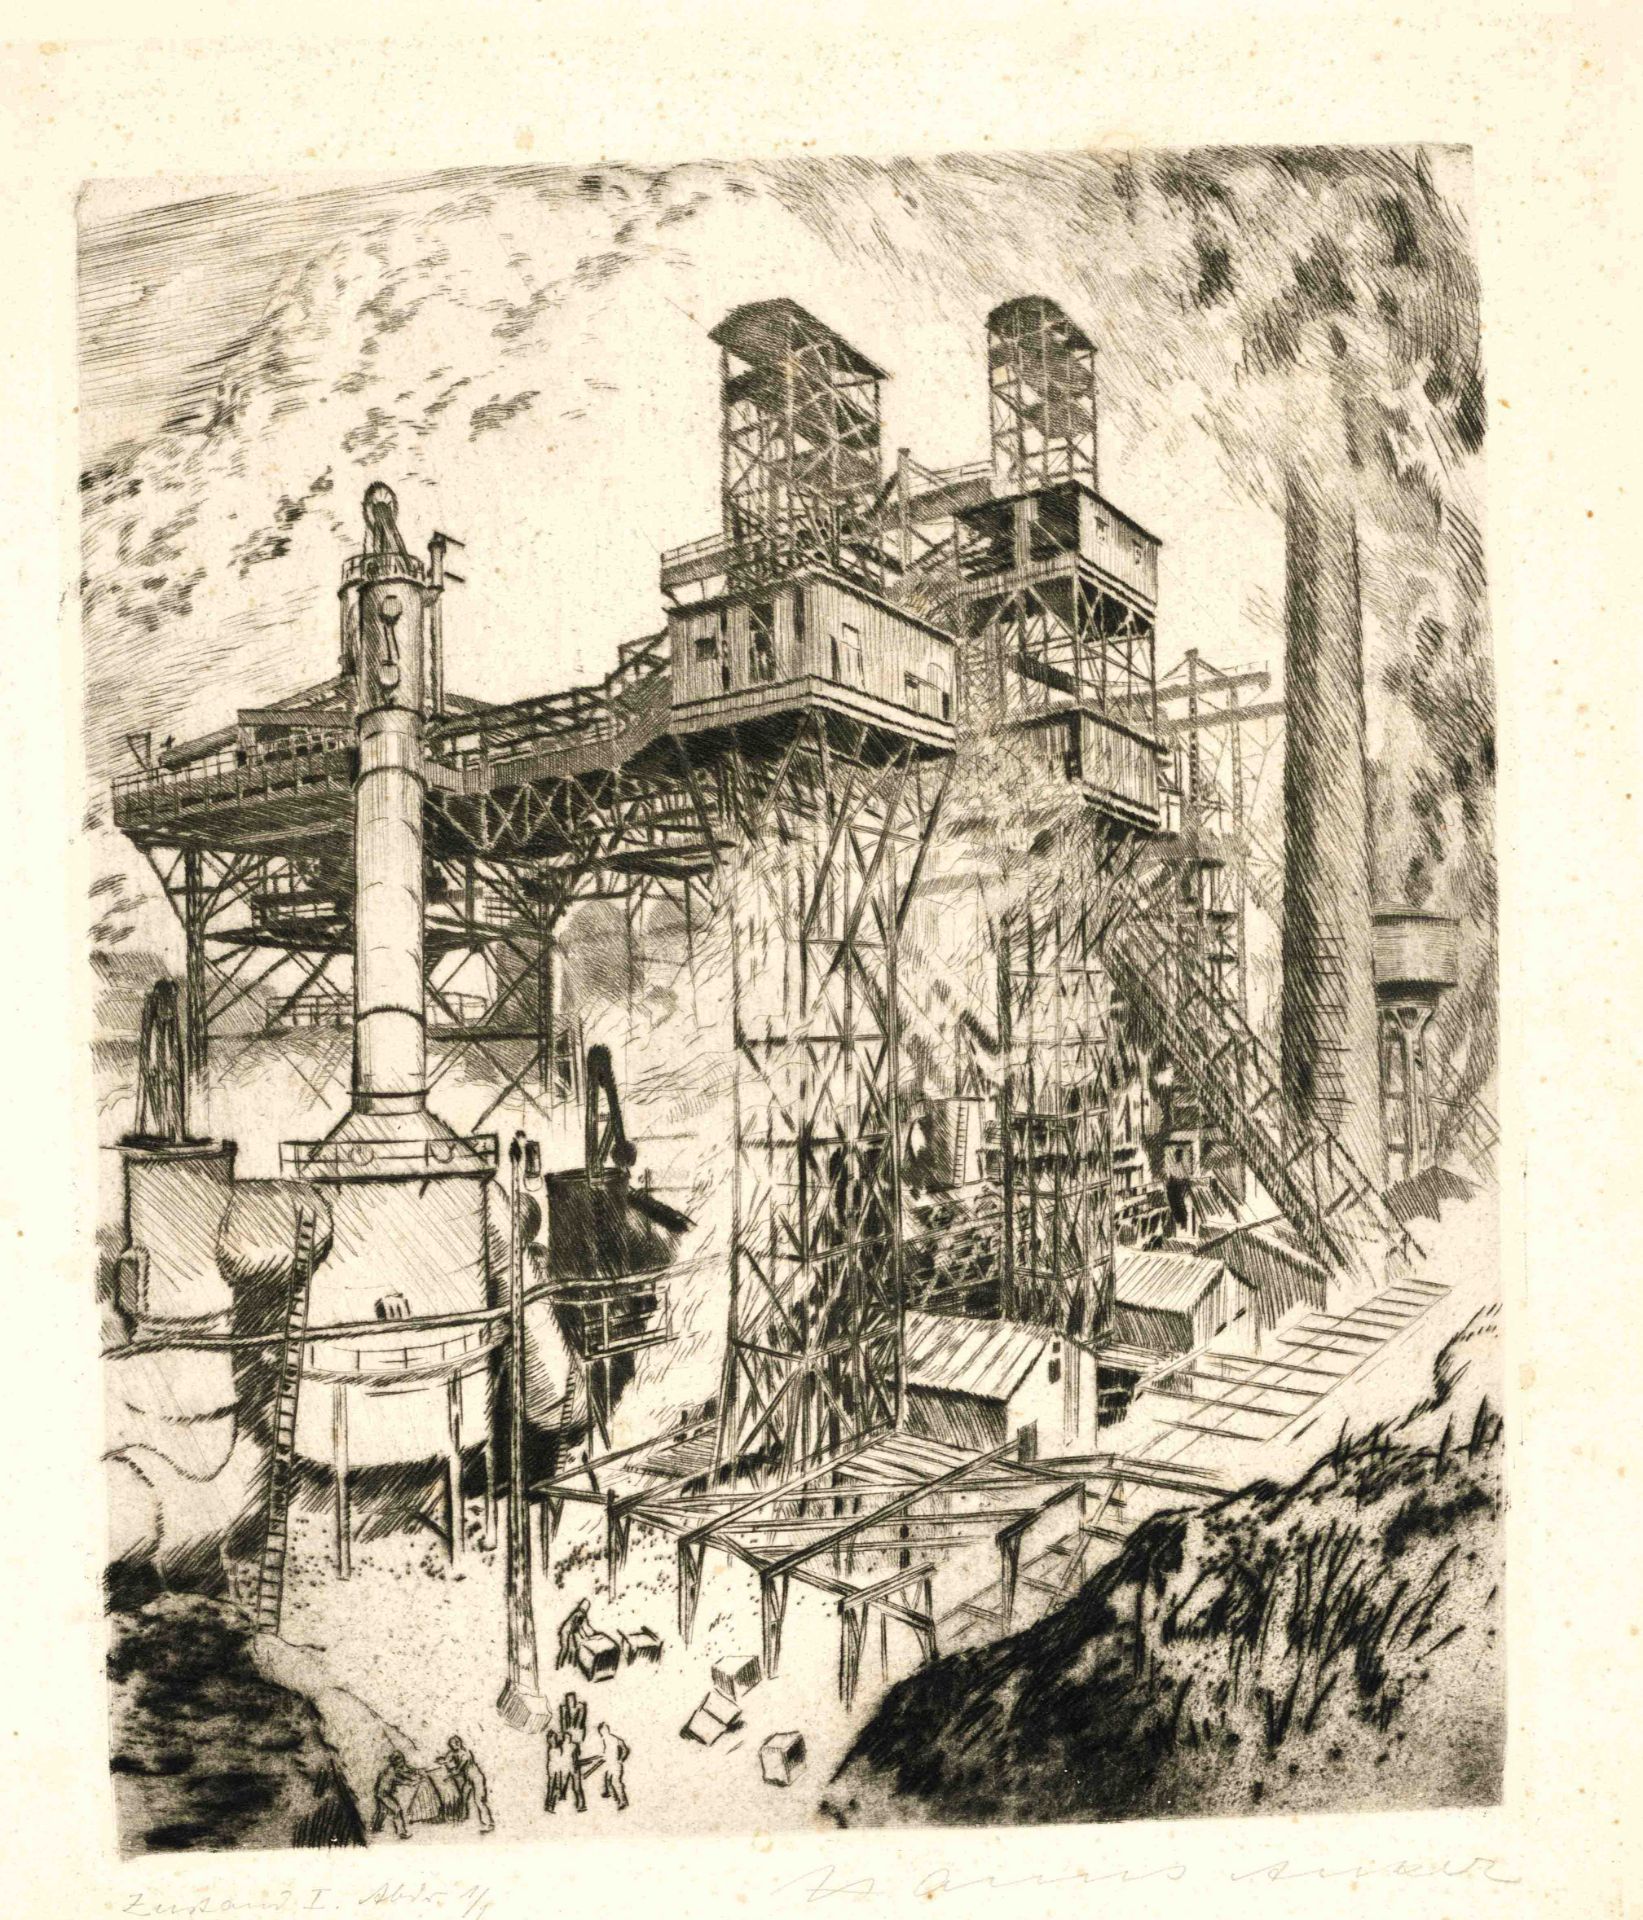 Hanns Anker (1873-1950), bundle of 11 etchings on industry and mining, each signed by hand, some - Image 4 of 4